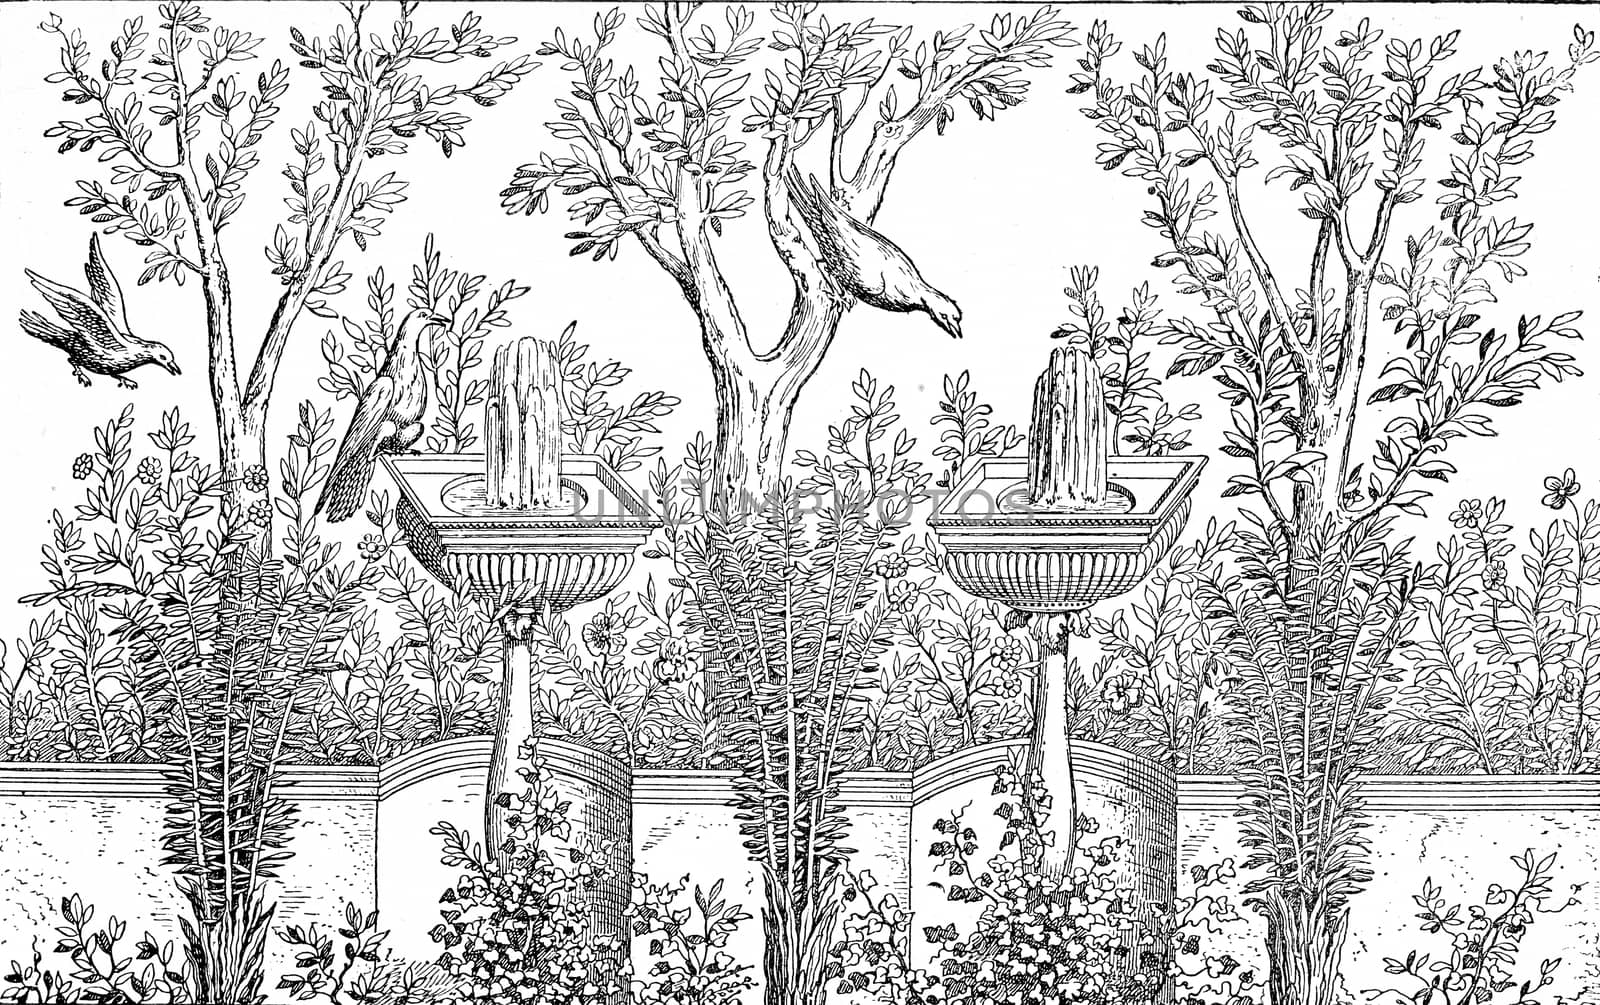 Decorative Garden, vintage engraved illustration. Private life of Ancient-Antique family-1881.
